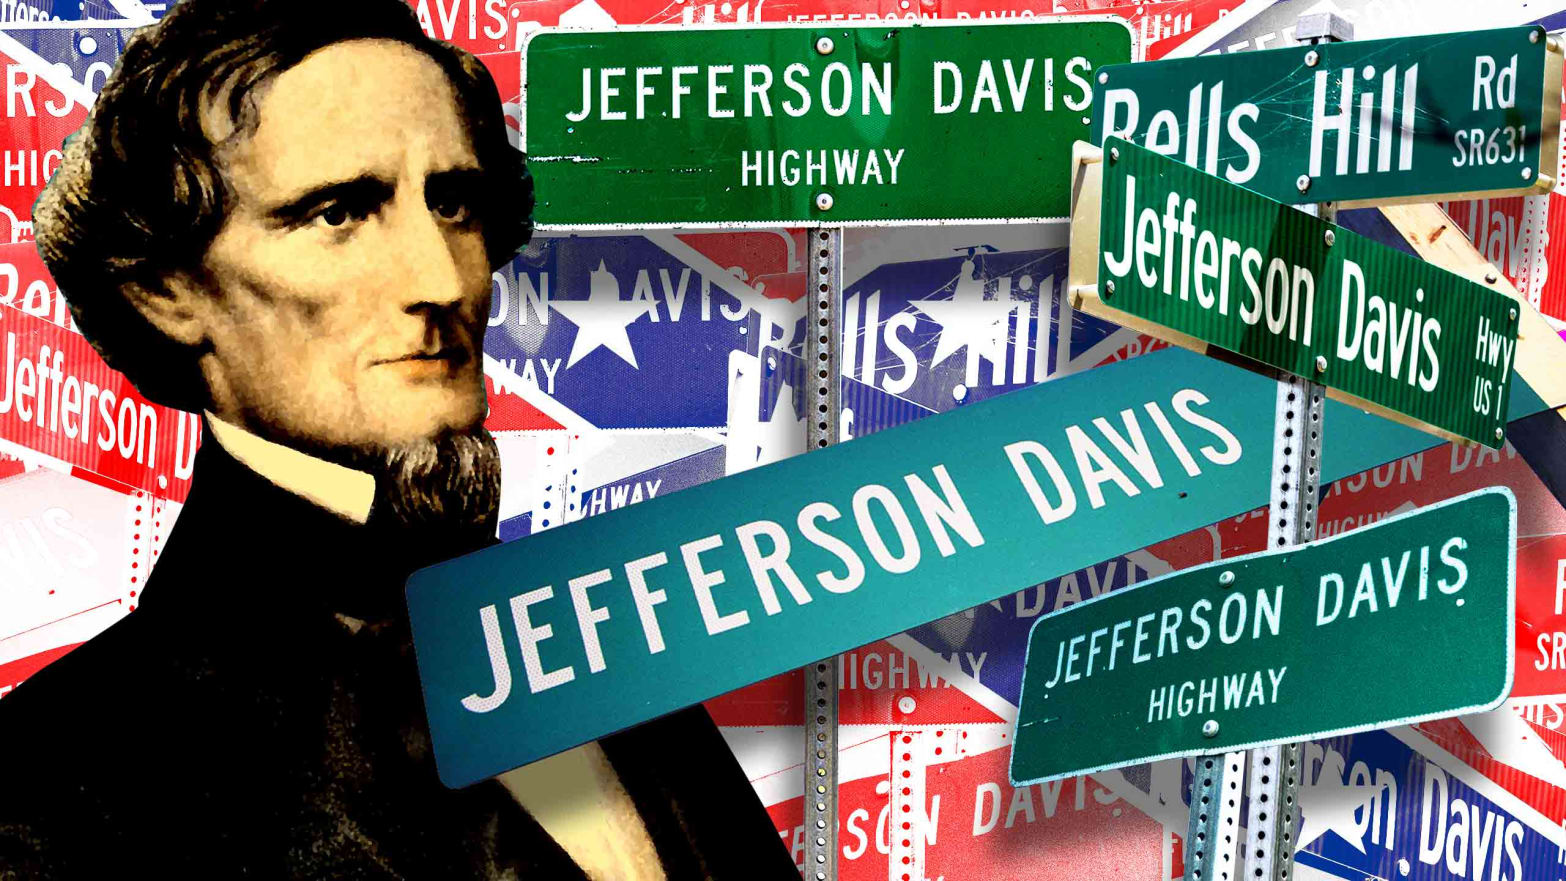 The Jefferson Davis Memorial Highway stretched from Virginia to California in response to the Lincoln HIghway. A century later, it hasn’t all been erased.